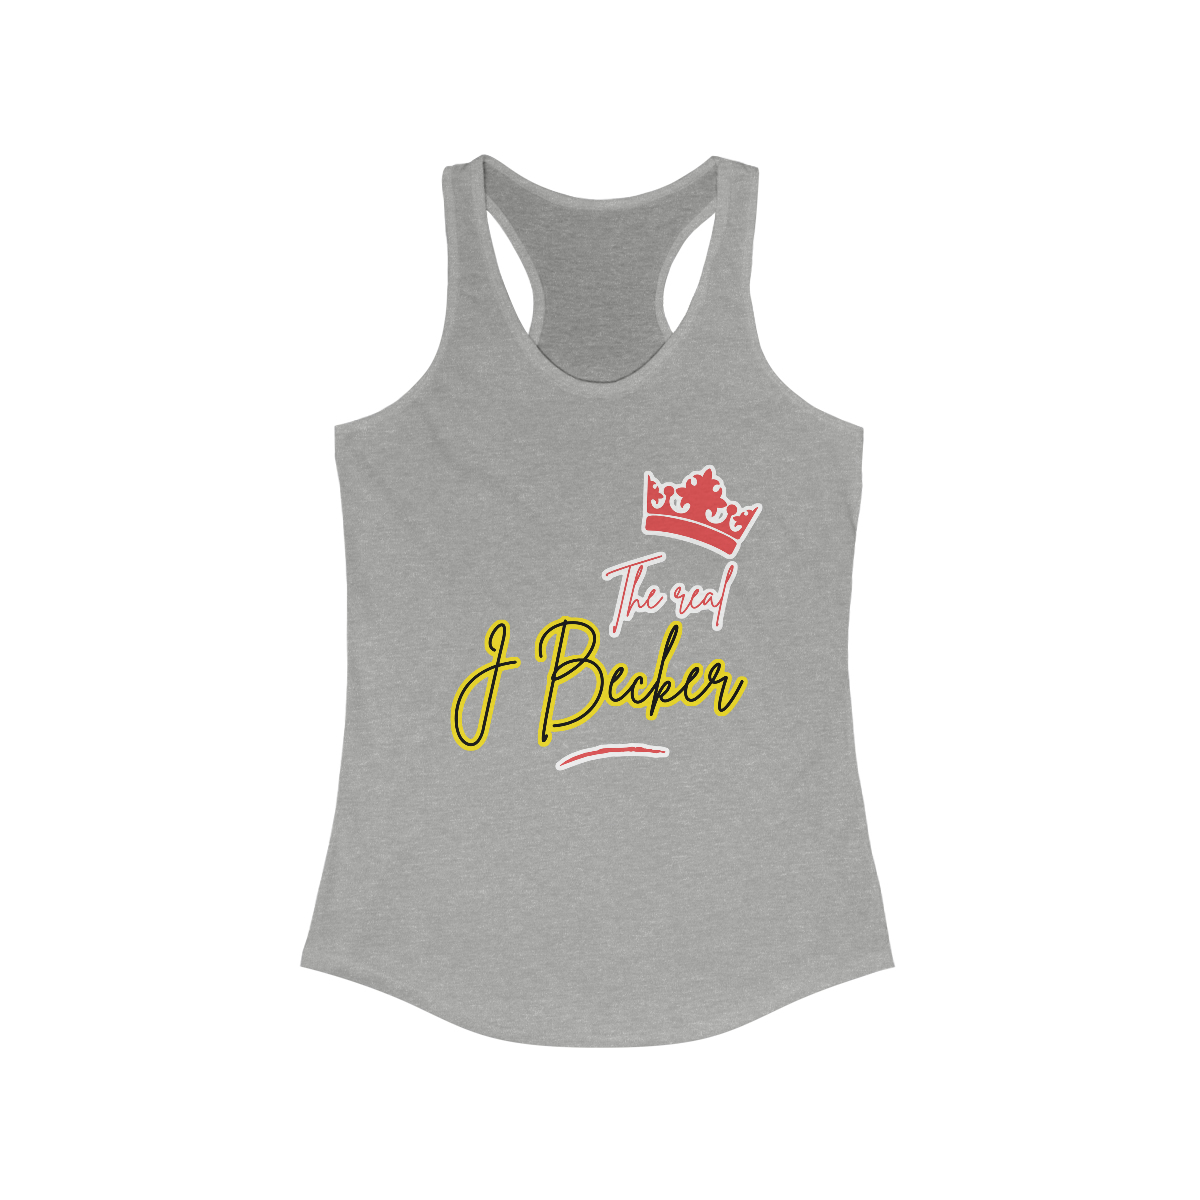 The Offical @THEREALJBECKER Logo Women's Ideal Racerback Tank